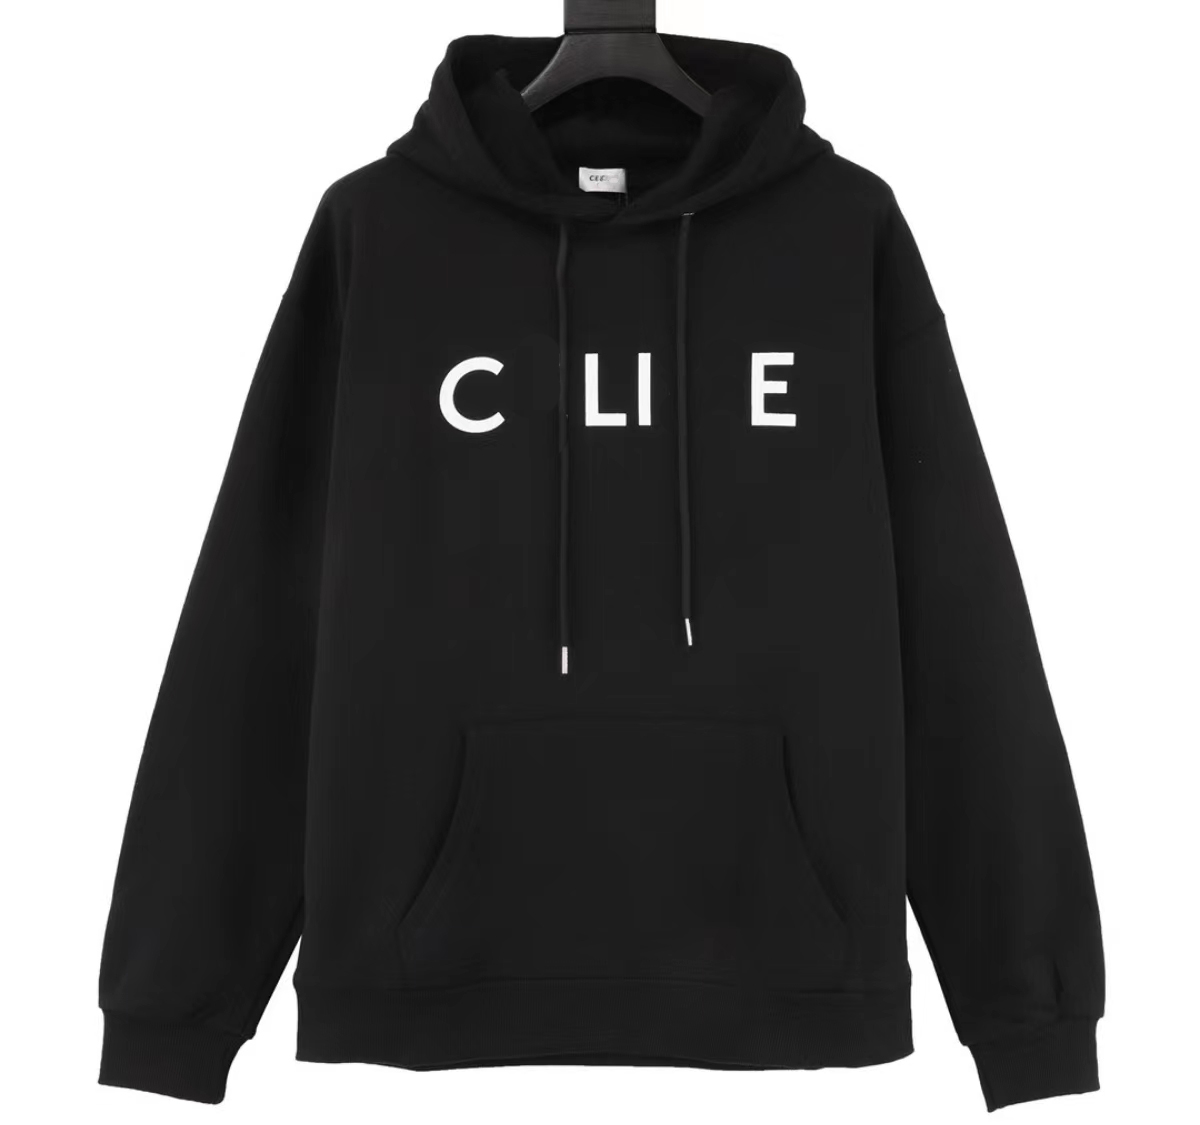 Designer hoodie for women, luxurious letter hoodies for men, fashionable and minimalist high weight hoodies